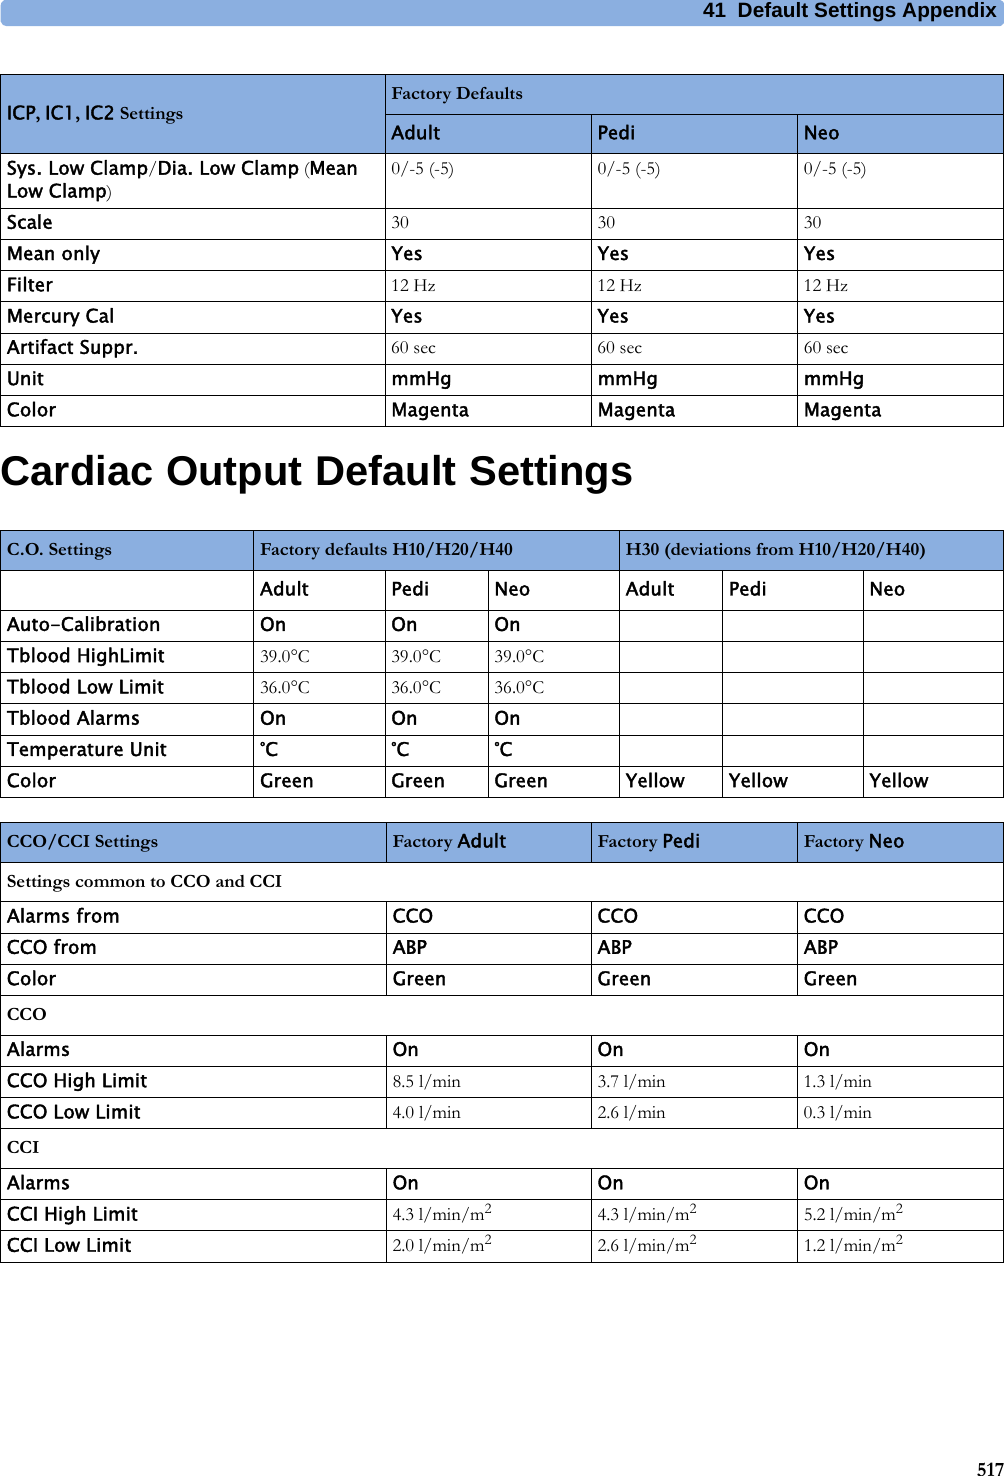 41 Default Settings Appendix517Cardiac Output Default SettingsSys. Low Clamp/Dia. Low Clamp (Mean Low Clamp)0/-5 (-5) 0/-5 (-5) 0/-5 (-5)Scale 30 30 30Mean only Yes Yes YesFilter 12 Hz 12 Hz 12 HzMercury Cal Yes Yes YesArtifact Suppr. 60 sec 60 sec 60 secUnit mmHg mmHg mmHgColor Magenta Magenta MagentaICP, IC1, IC2 SettingsFactory DefaultsAdult Pedi NeoC.O. Settings Factory defaults H10/H20/H40 H30 (deviations from H10/H20/H40)Adult Pedi Neo Adult Pedi NeoAuto-Calibration On On OnTblood HighLimit 39.0°C 39.0°C 39.0°CTblood Low Limit 36.0°C 36.0°C 36.0°CTblood Alarms On On OnTemperature Unit °C °C °CColor Green Green Green Yellow Yellow YellowCCO/CCI Settings Factory Adult Factory Pedi Factory NeoSettings common to CCO and CCIAlarms from CCO CCO CCOCCO from ABP ABP ABPColor Green Green GreenCCOAlarms On On OnCCO High Limit 8.5 l/min 3.7 l/min 1.3 l/minCCO Low Limit 4.0 l/min 2.6 l/min 0.3 l/minCCIAlarms On On OnCCI High Limit 4.3 l/min/m24.3 l/min/m25.2 l/min/m2CCI Low Limit 2.0 l/min/m22.6 l/min/m21.2 l/min/m2